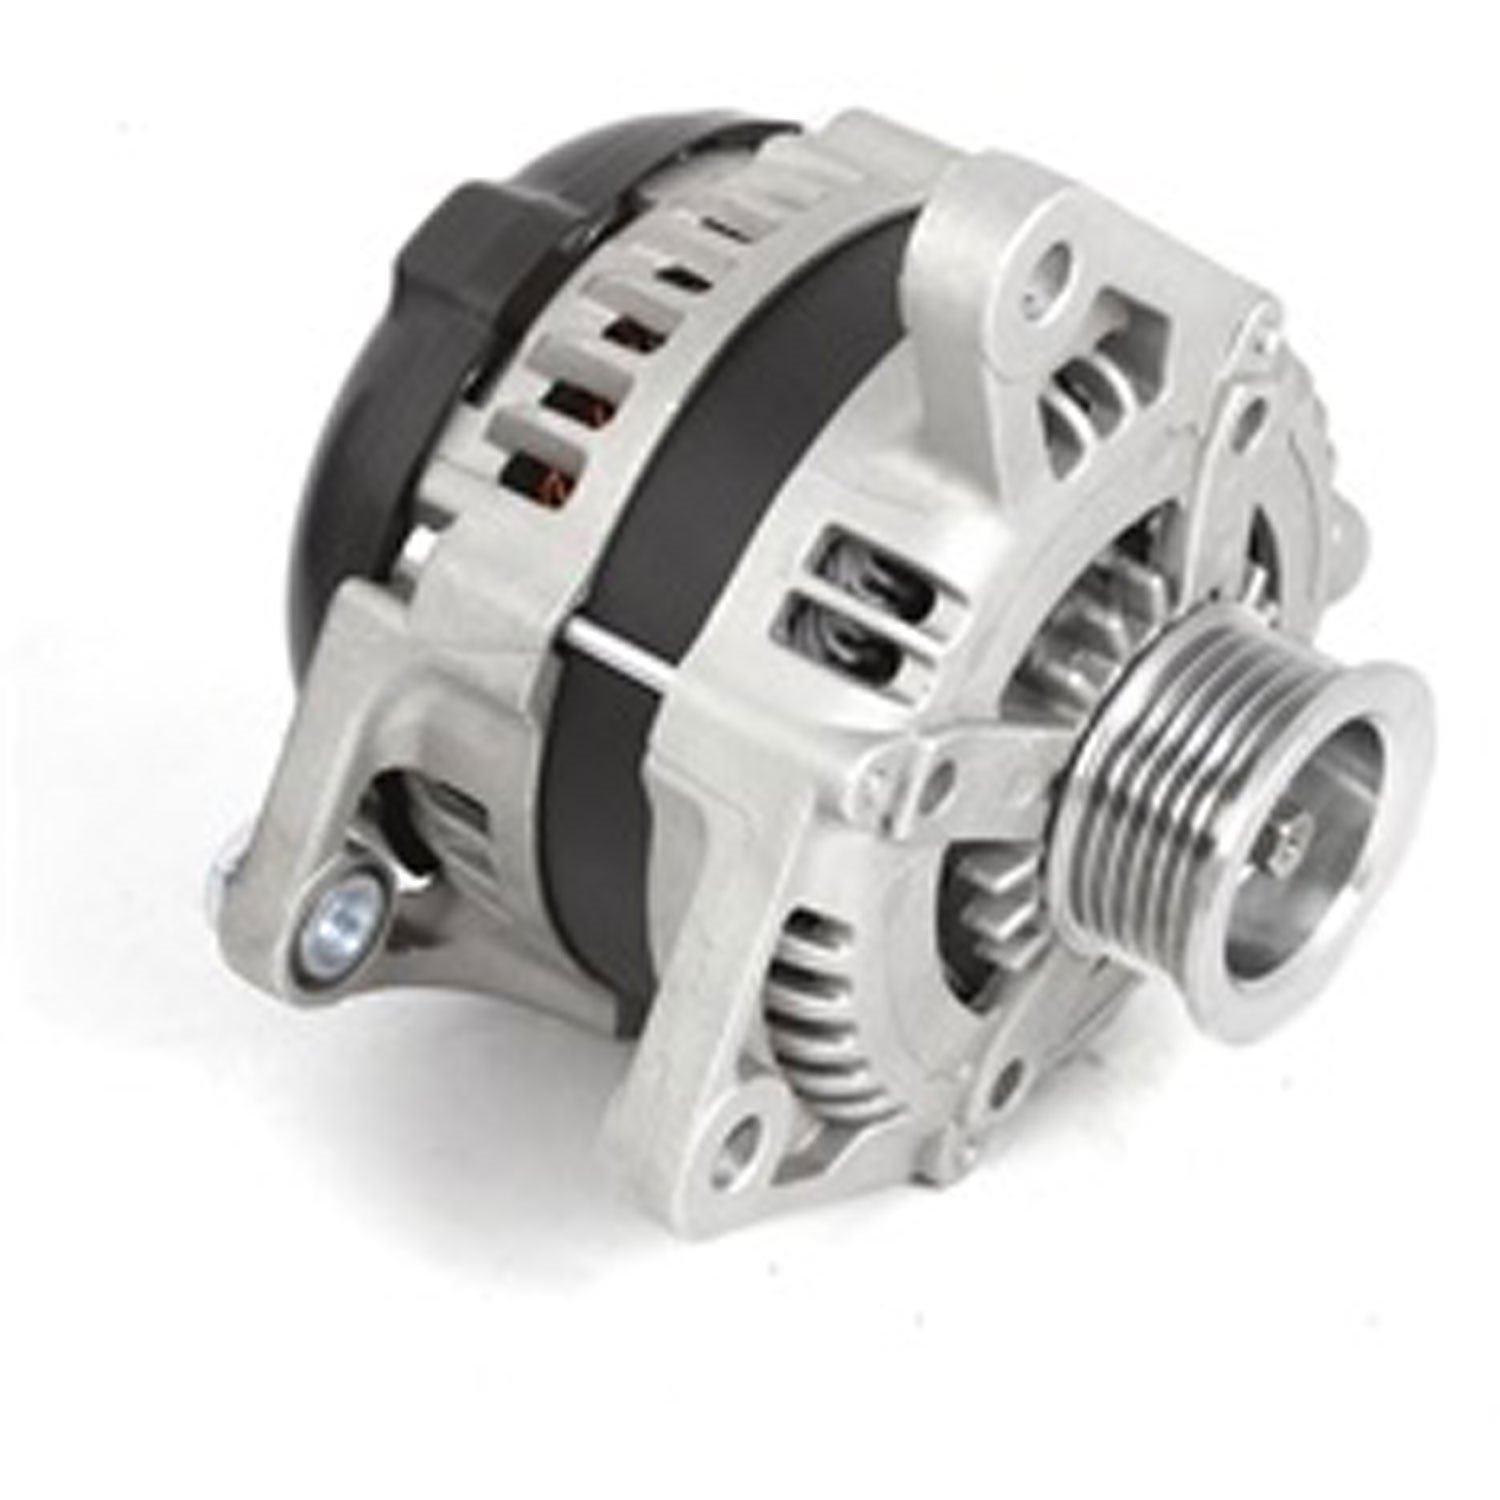 140 amp replacement alternator from Omix-ADA, Fits 07-11 Jeep Wrangler with a 3.8L engine.